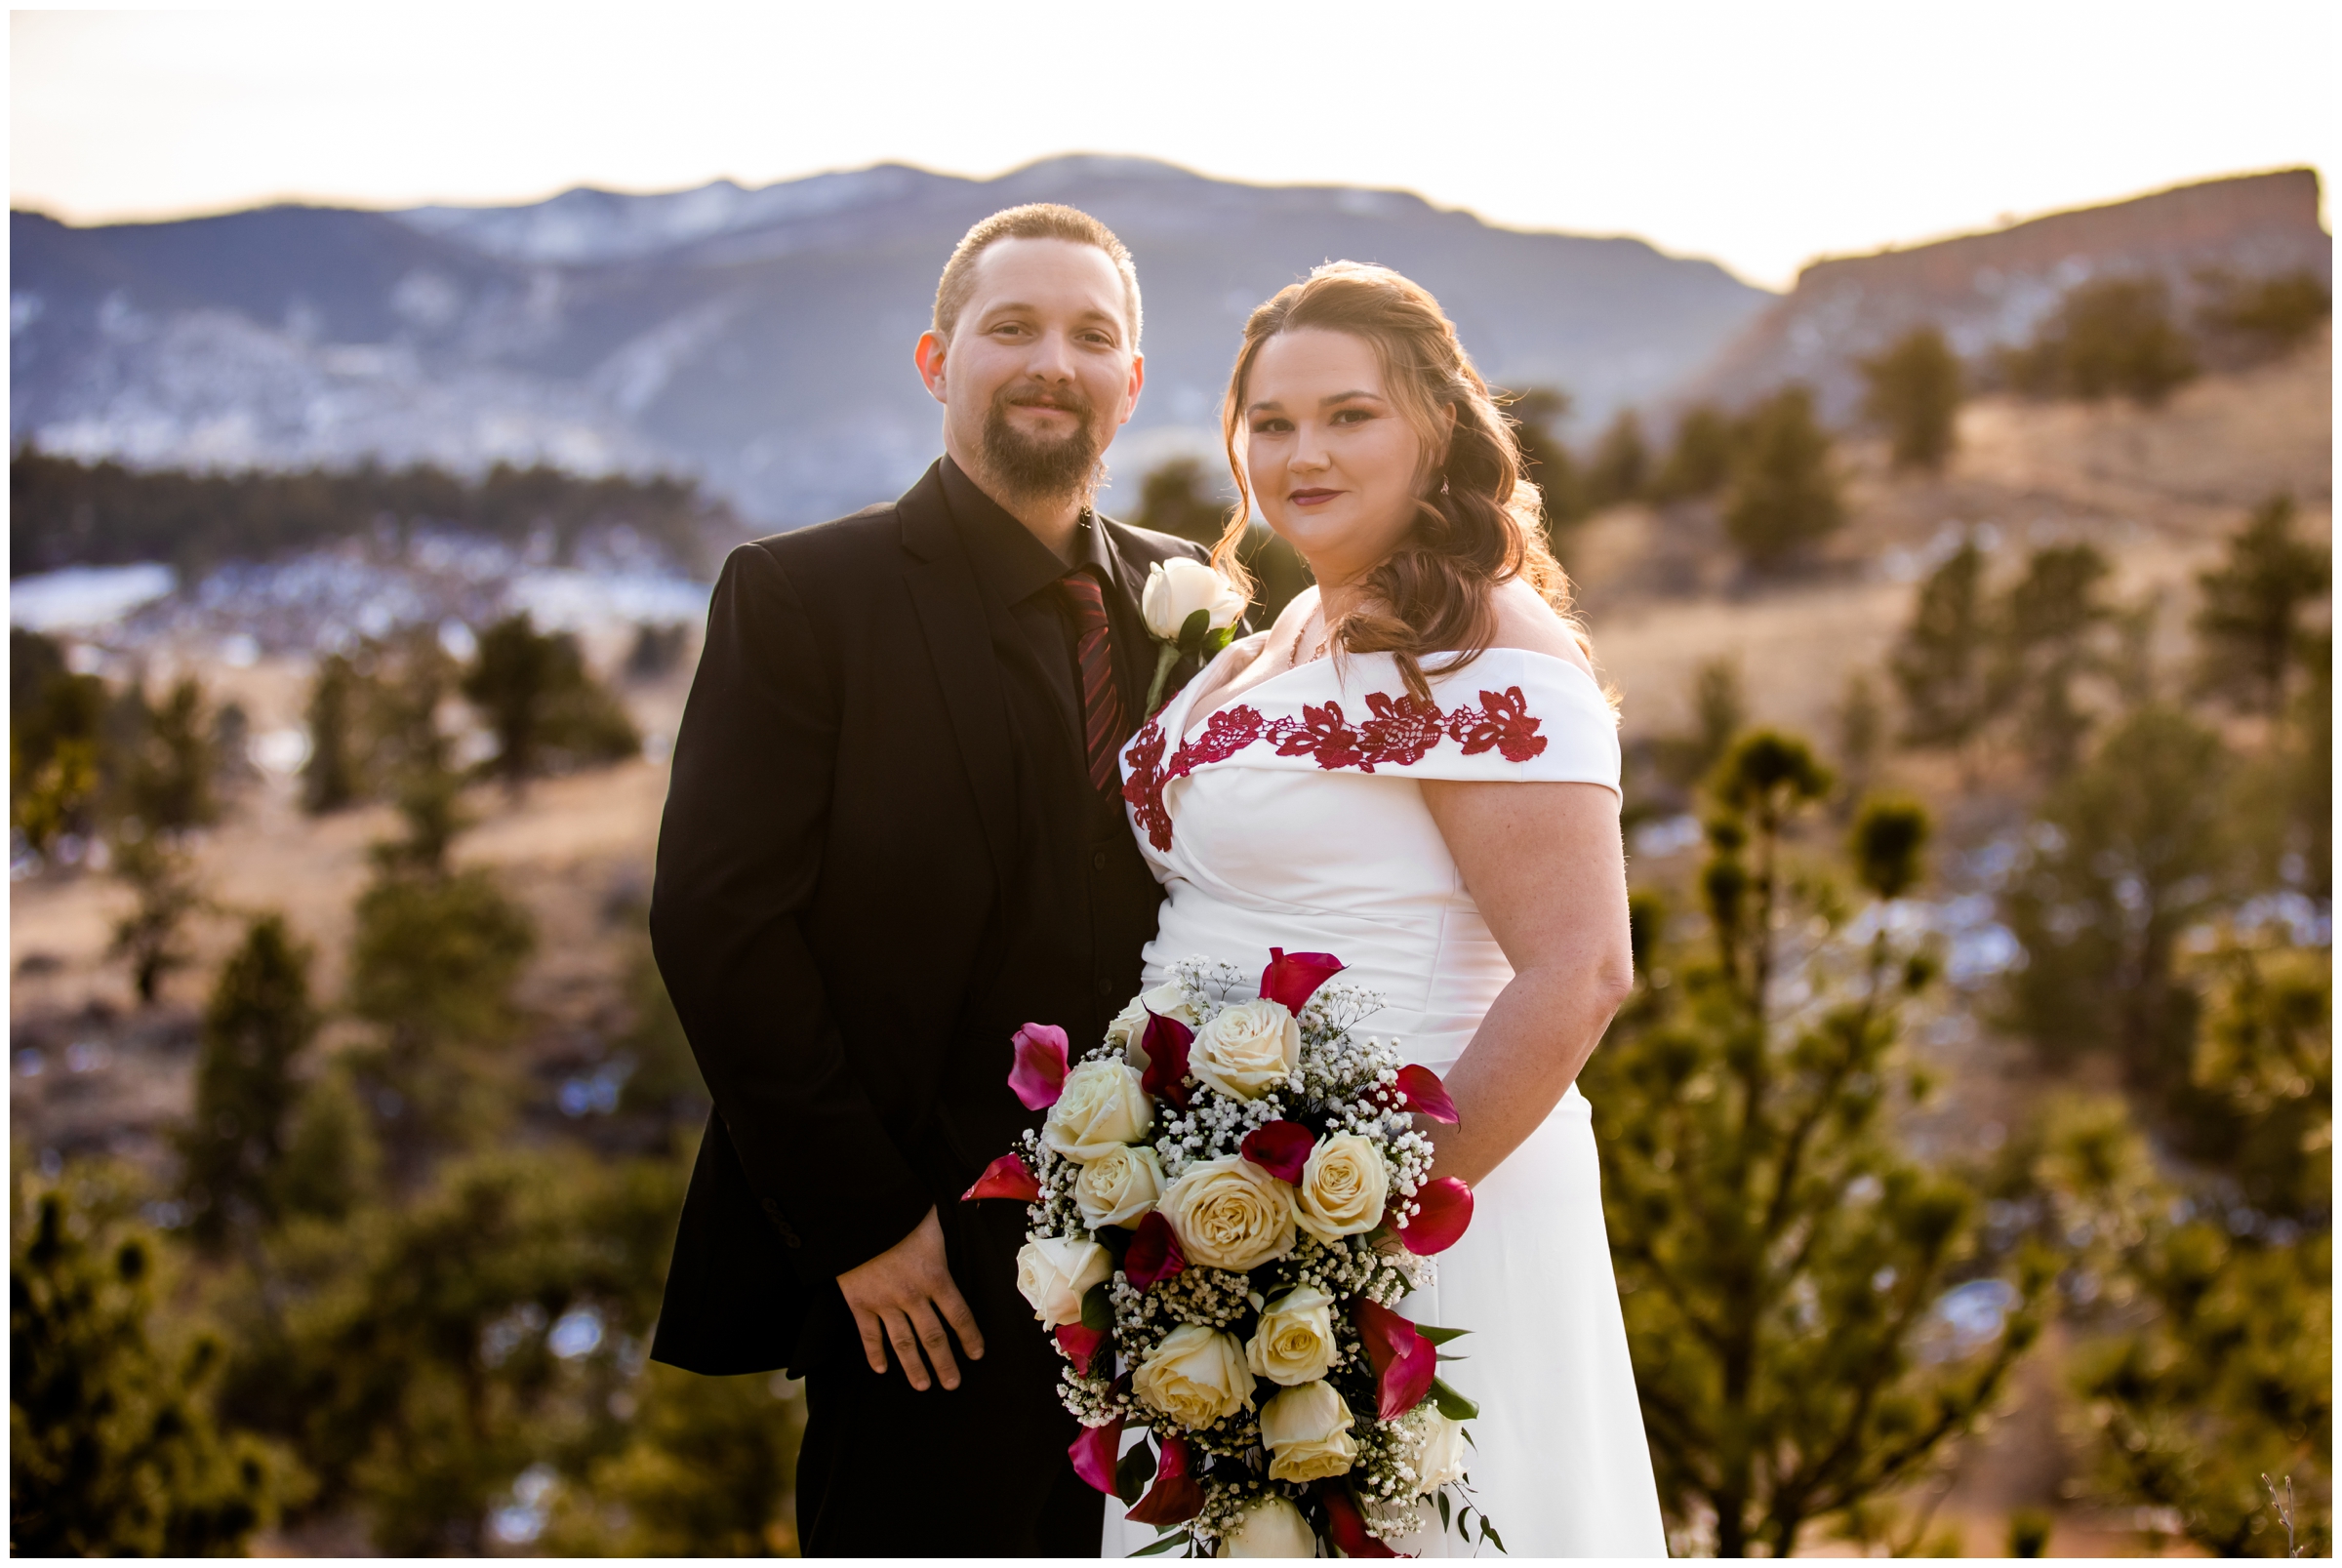 couple posing in front of mountains at sunset during winter wedding pictures at Lionscrest Manor in Colorado 